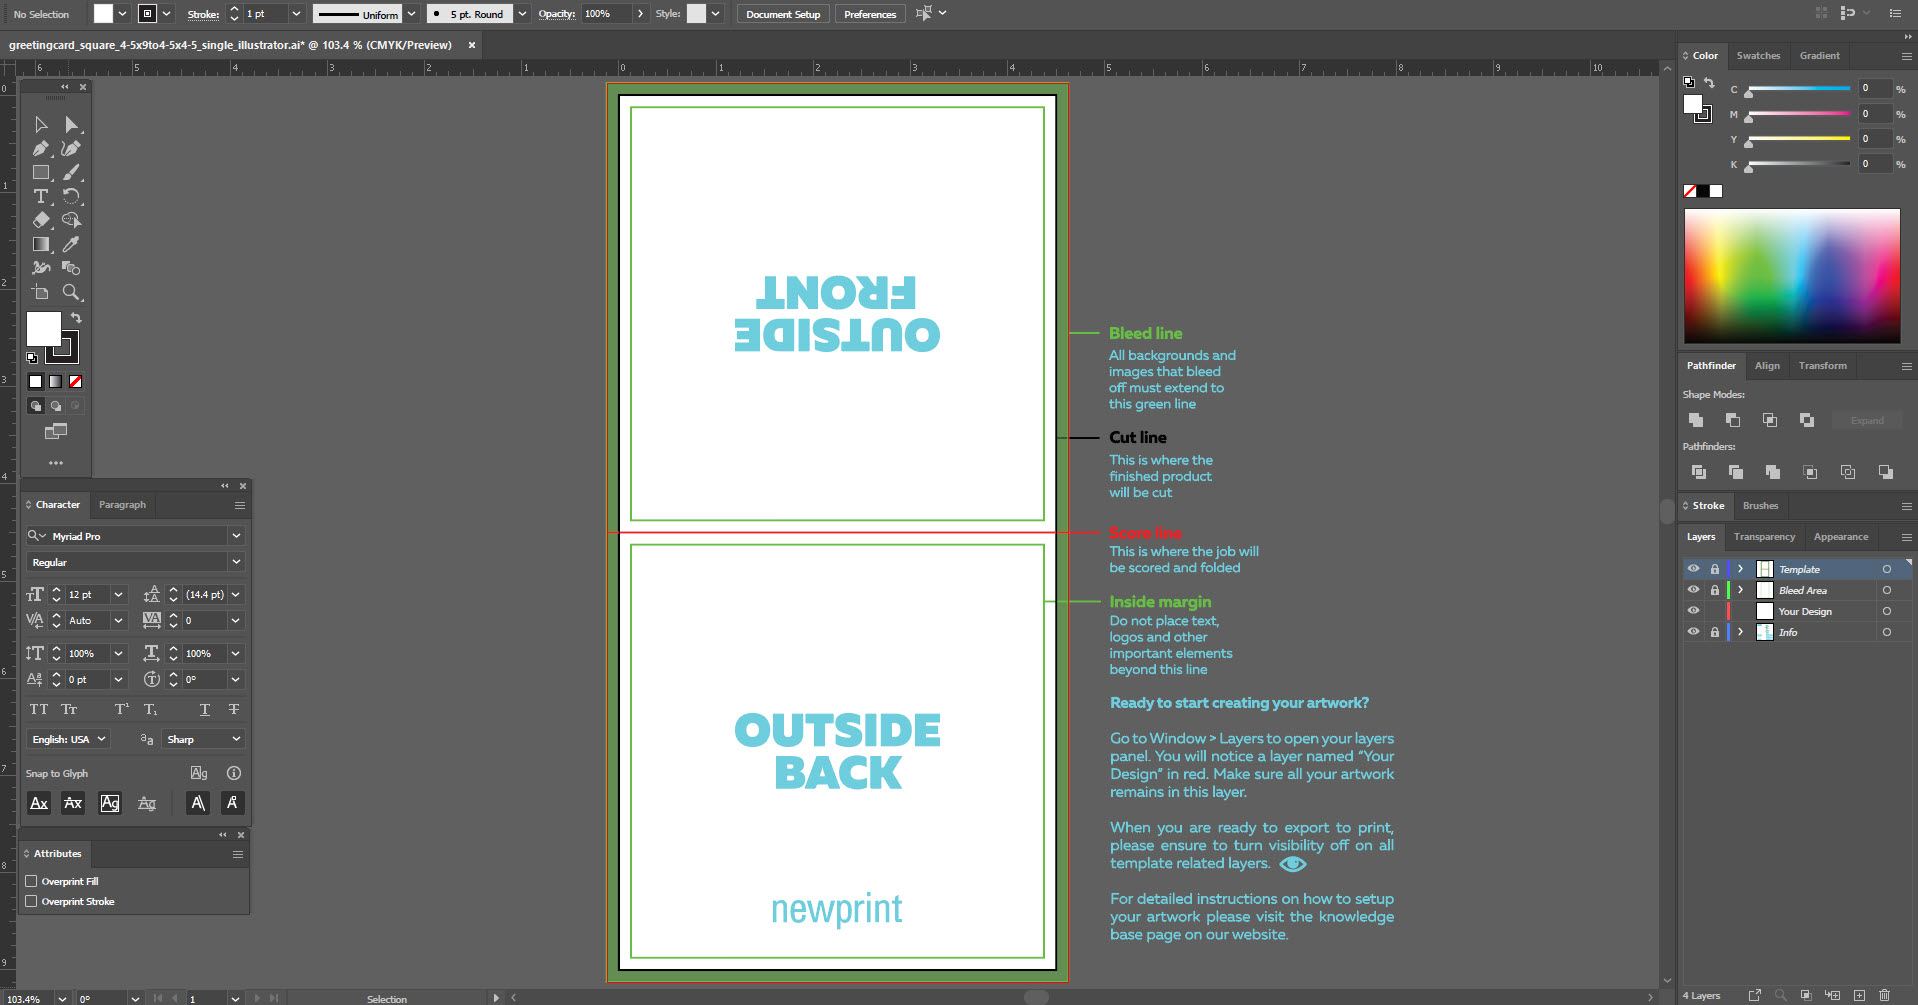 A screen shot of a blank print template in Adobe Illustrator.